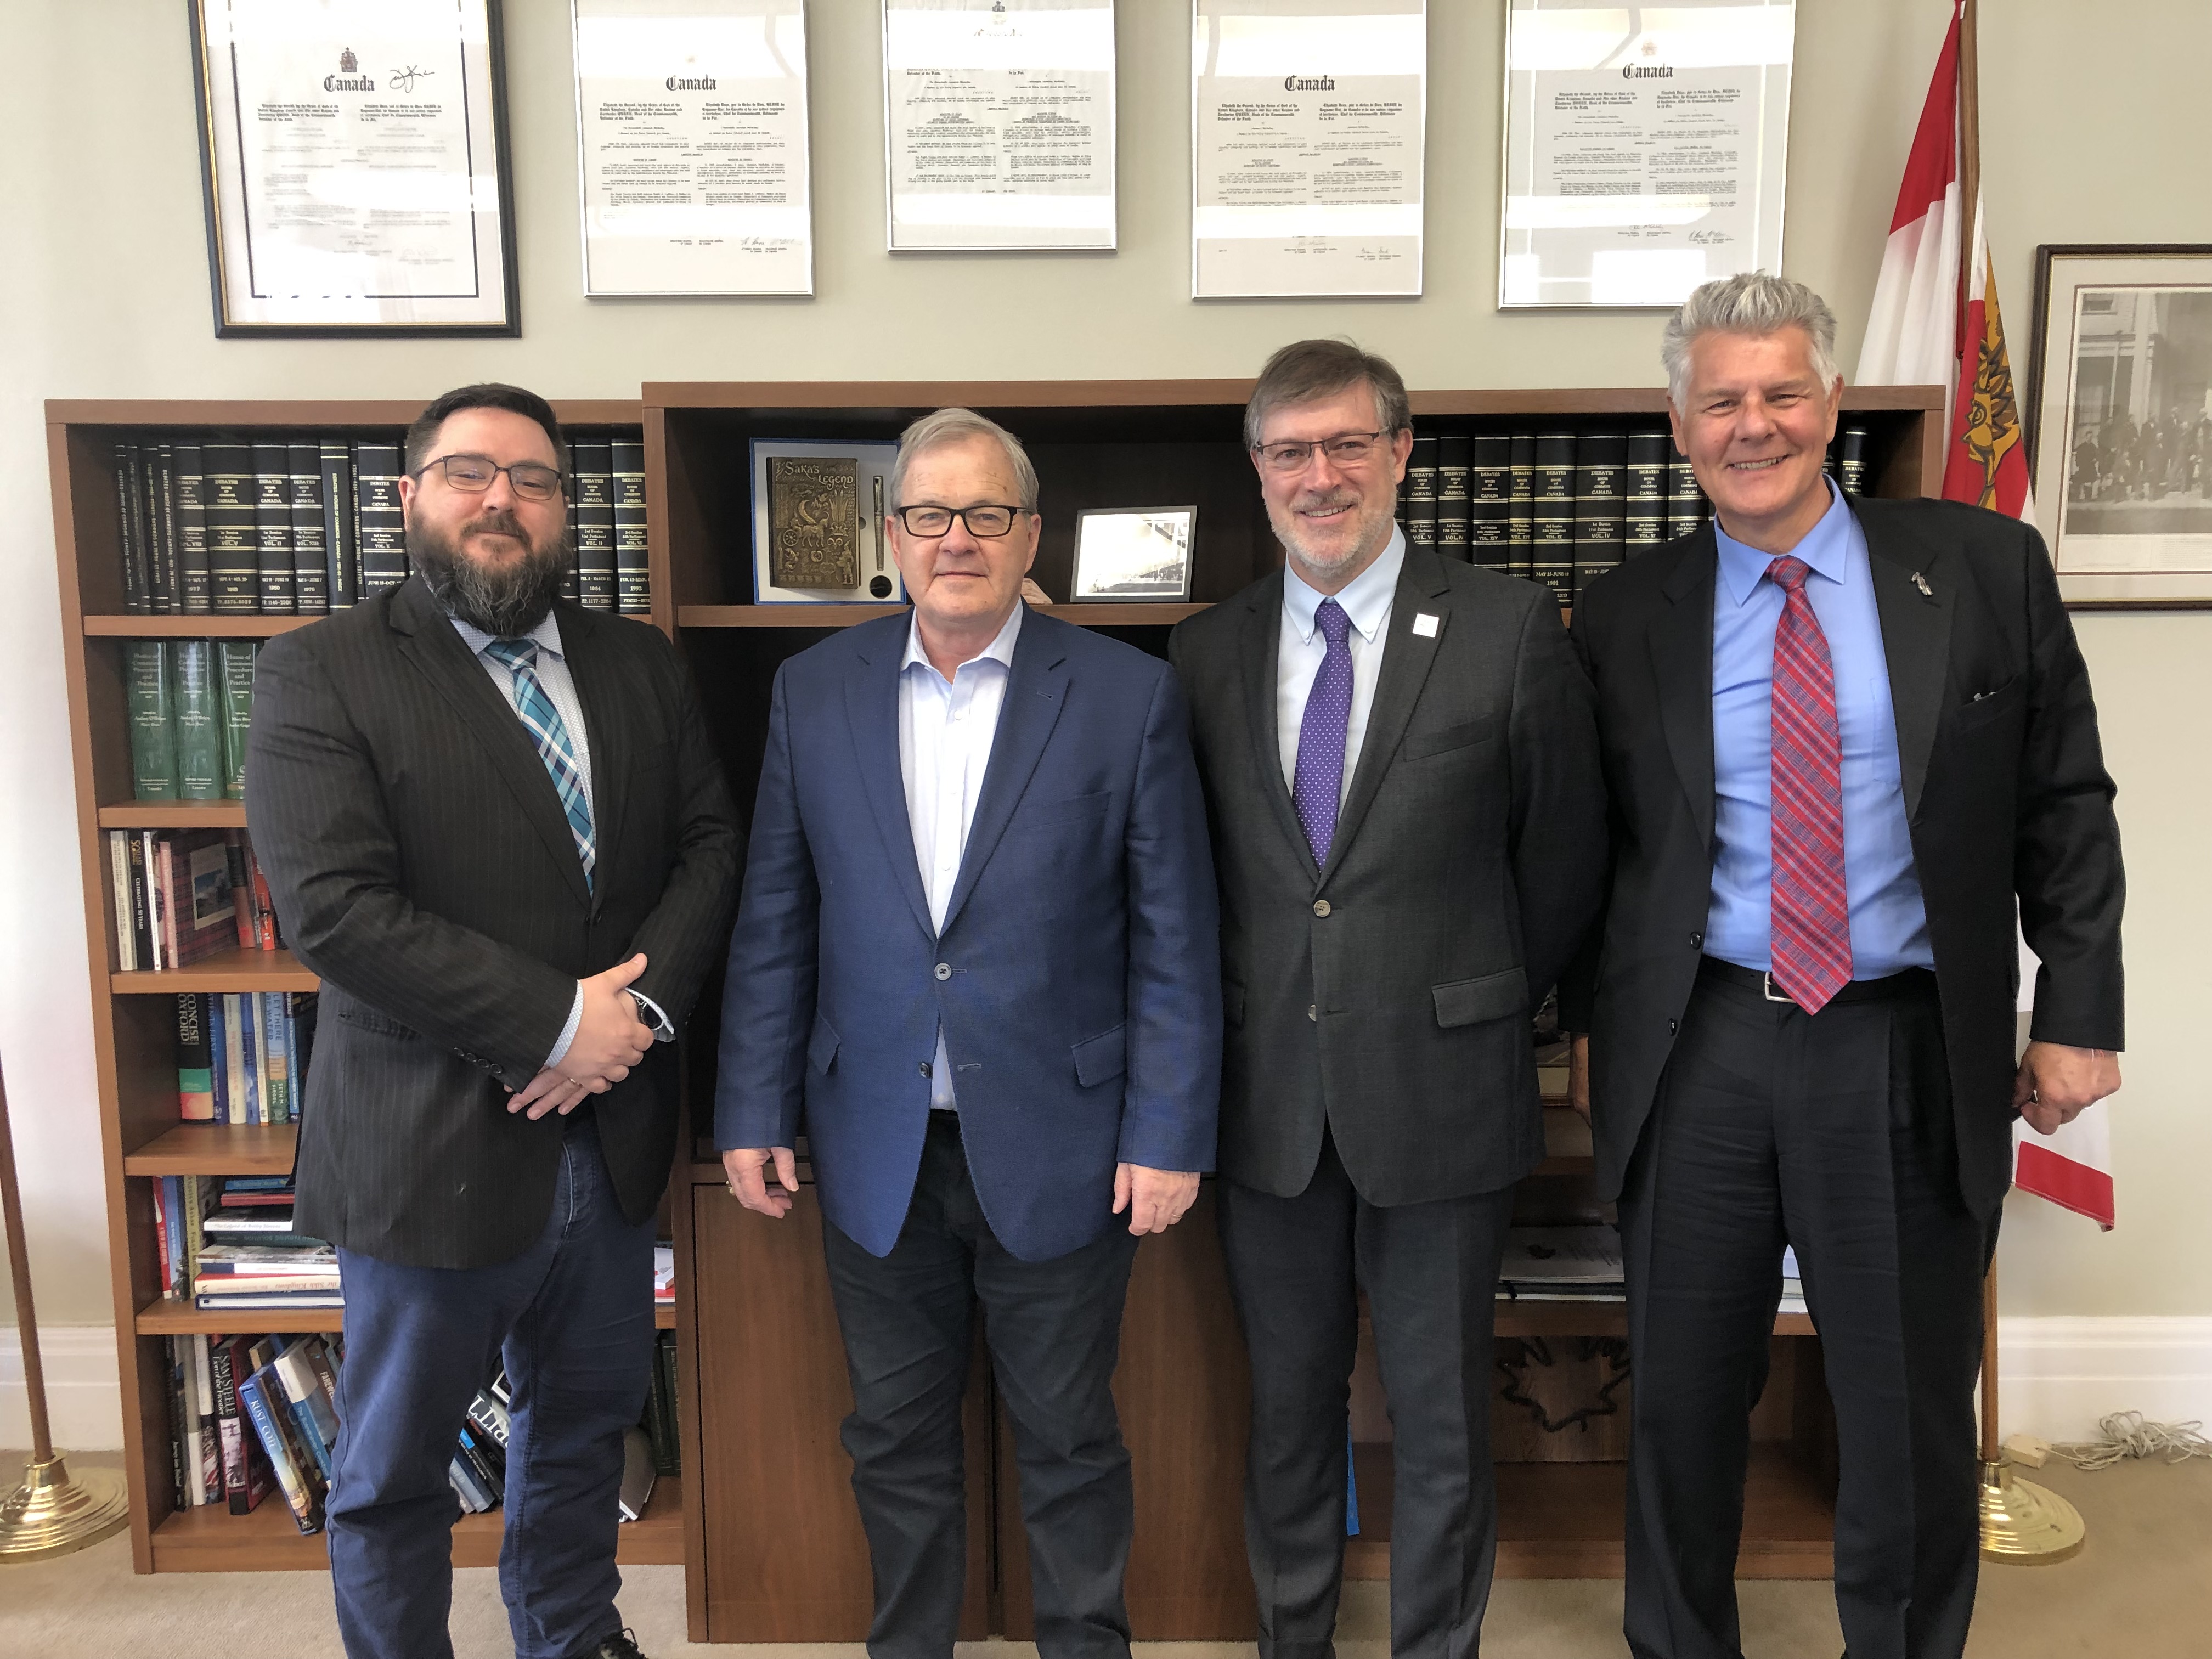 From left, Federal Retirees advocacy and policy officer Patrick Imbeau, Minister of Veterans Affairs Lawrence MacAulay, Federal Retirees CEO Simon Coakeley and Federal Retirees director of communications, marketing and recruitment Andrew McGillivary.